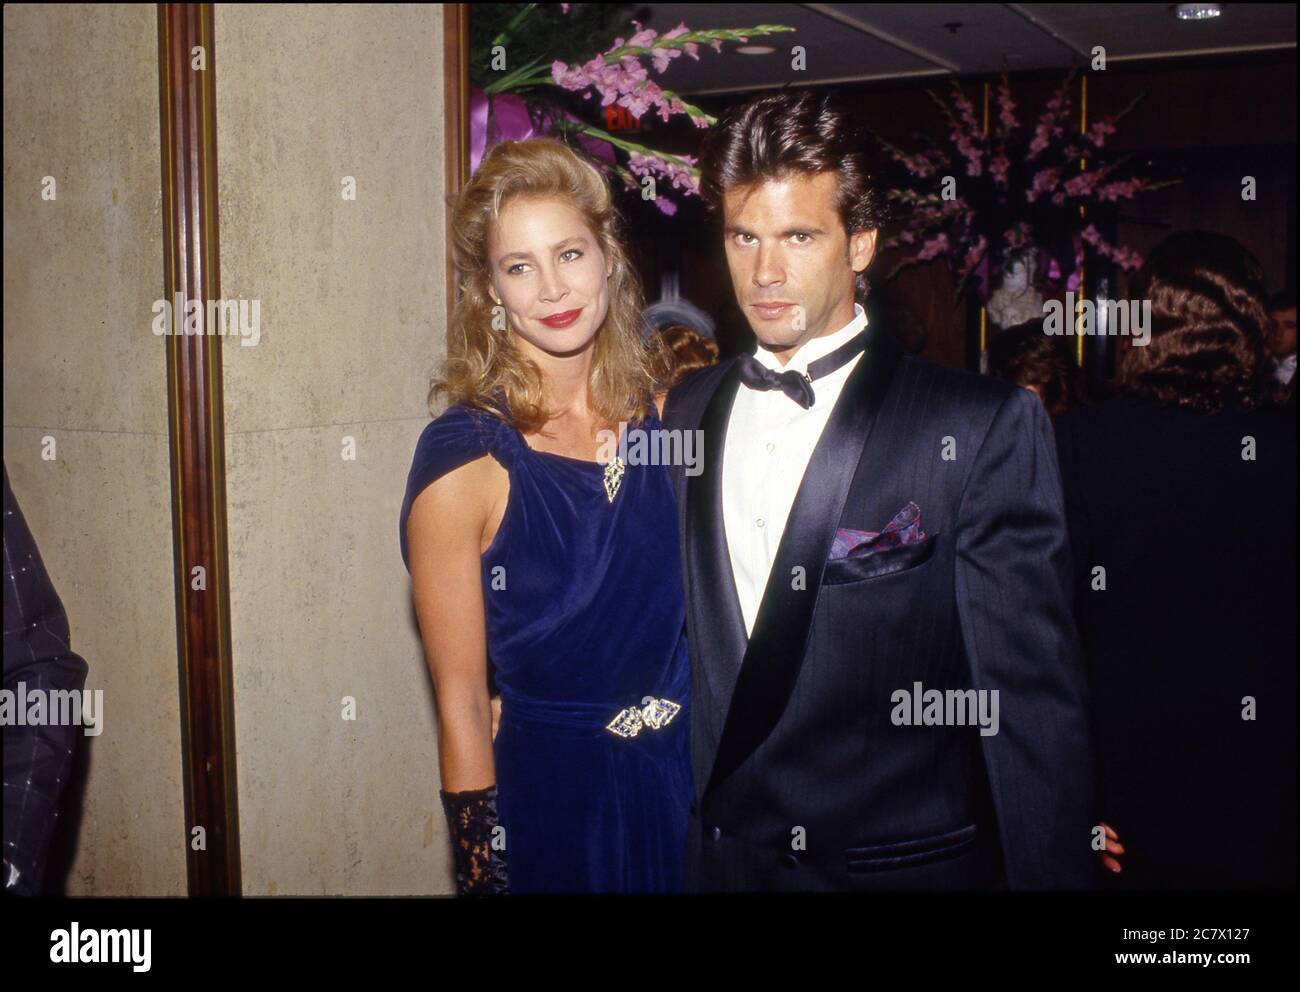 Lorenzo  Lamas of Falcon Crest arriving at event in Beverly Hills, CA Stock Photo